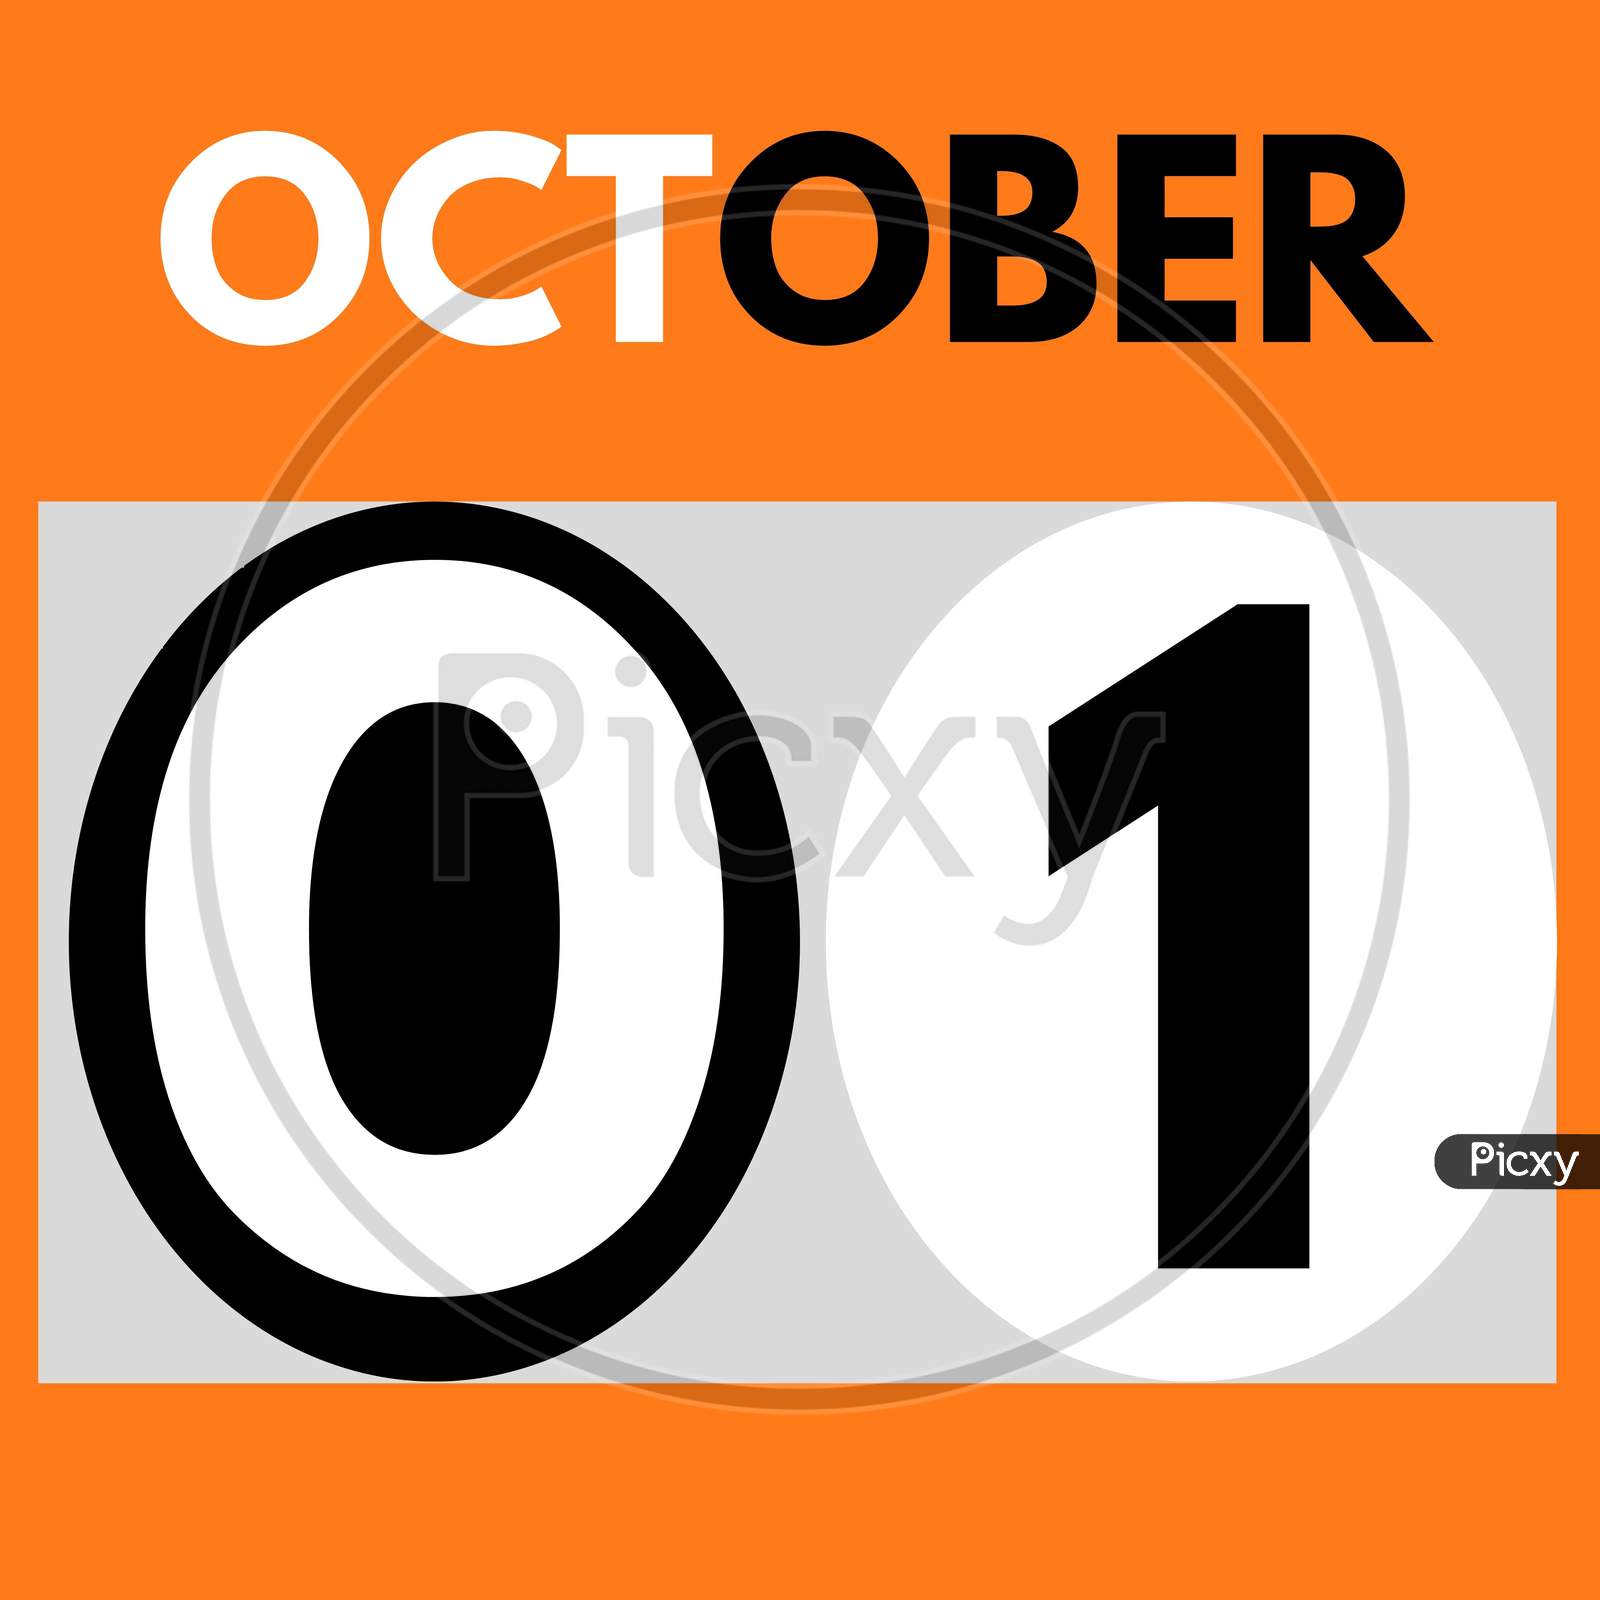 October 1 . Modern Daily Calendar Icon .Date ,Day, Month .Calendar For The Month Of October